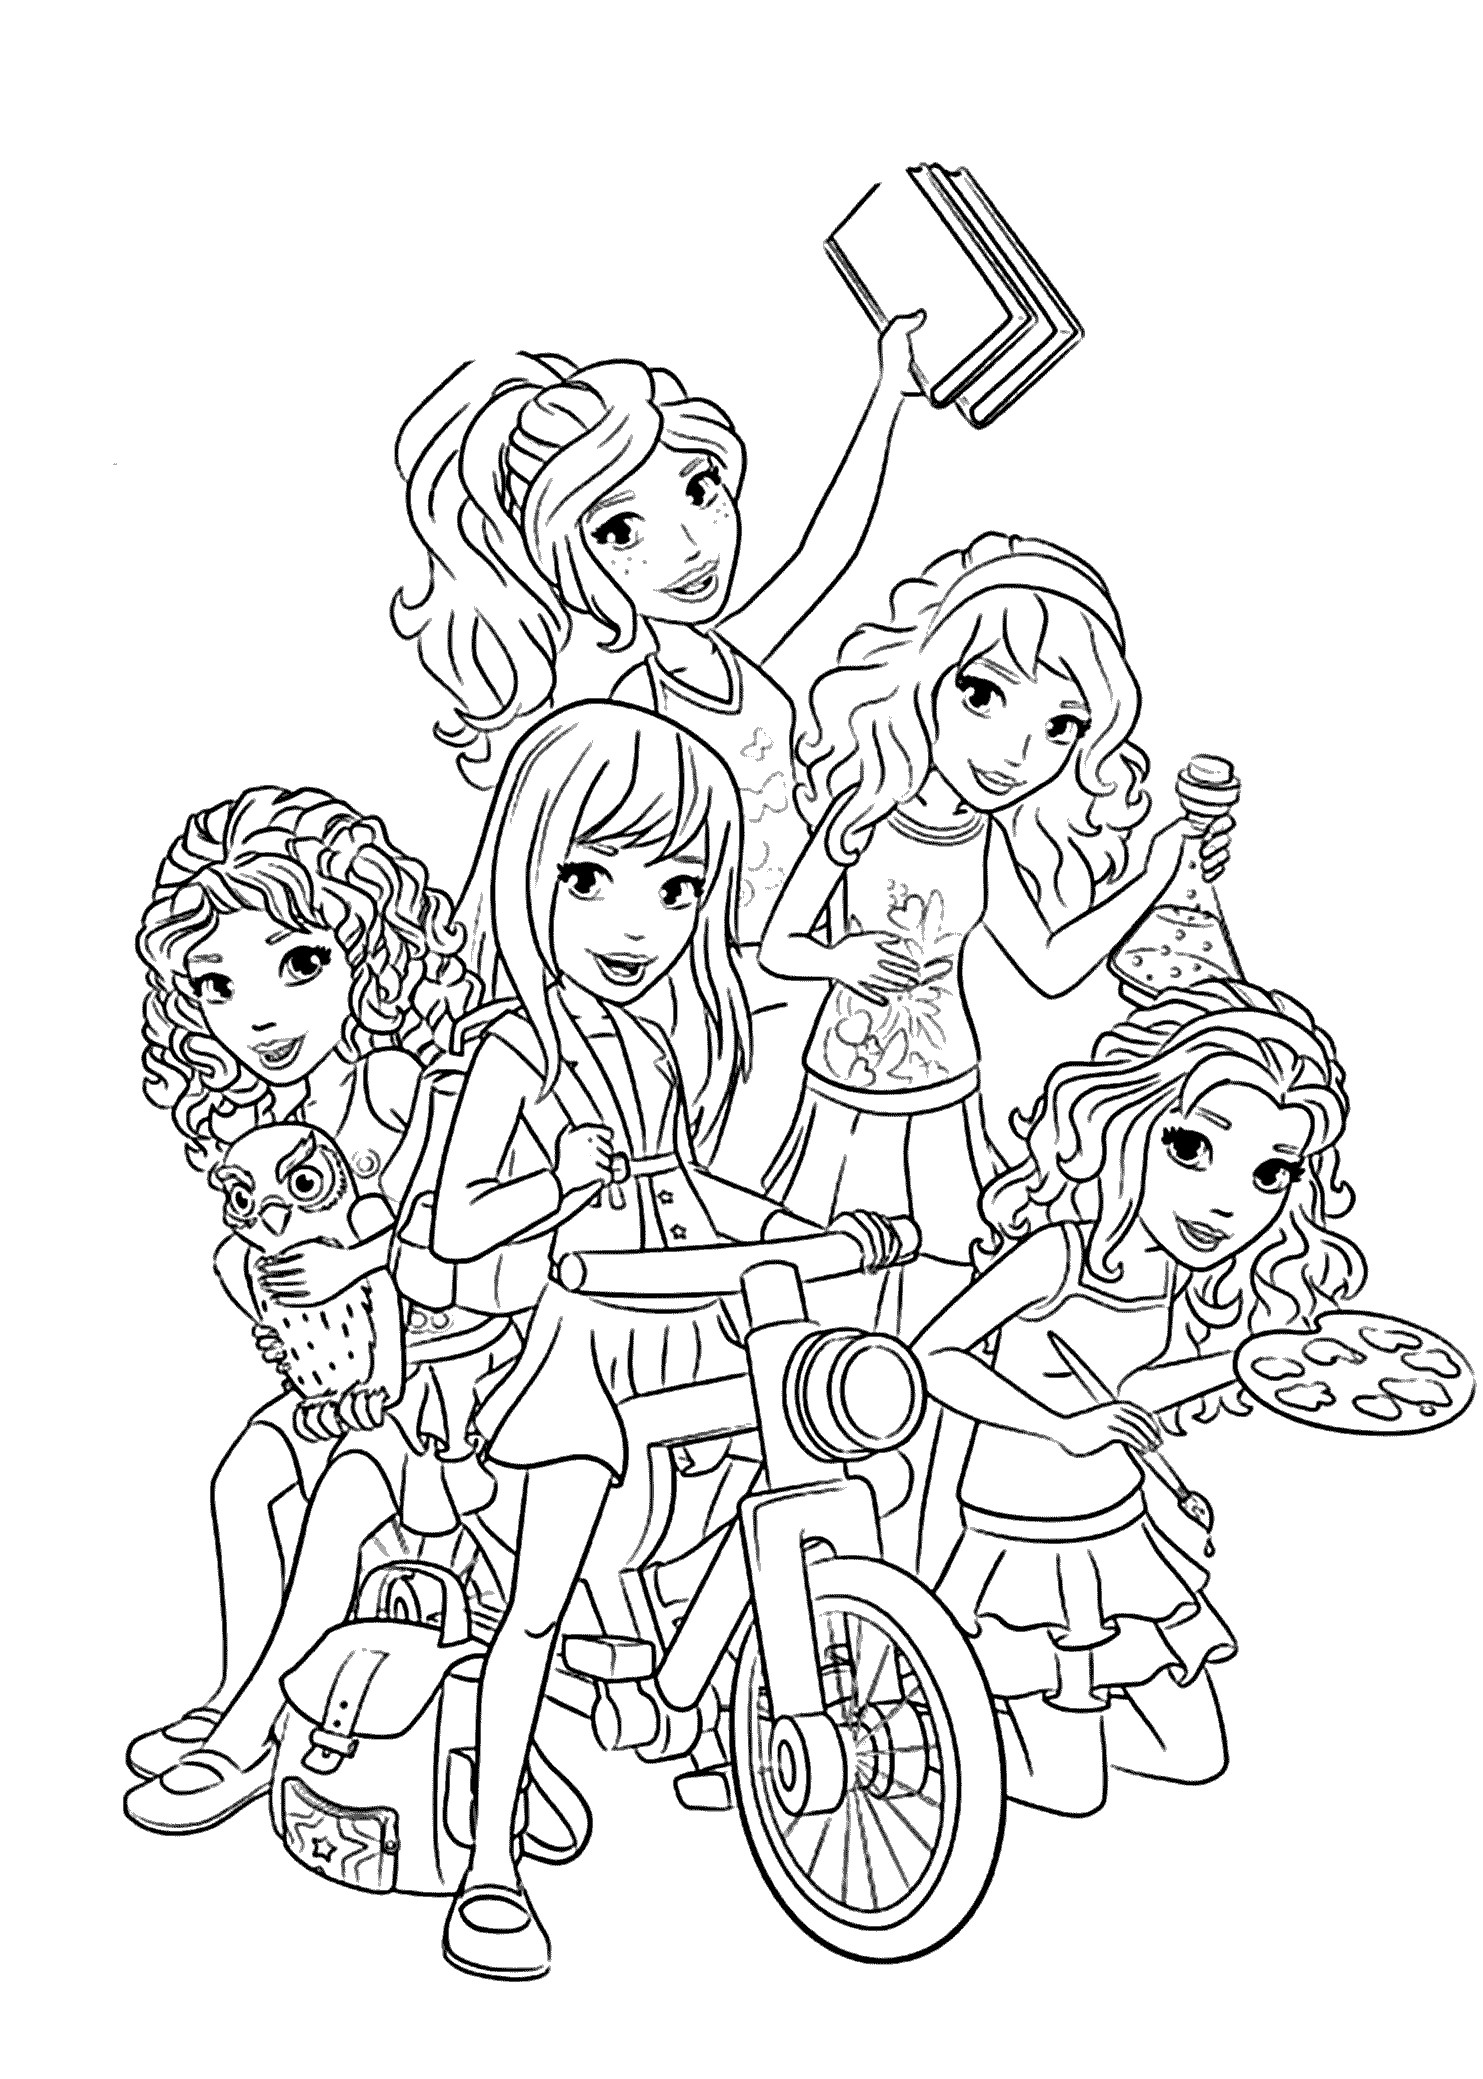 Lego Girls Coloring Pages
 Lego Friends all coloring page for kids printable free